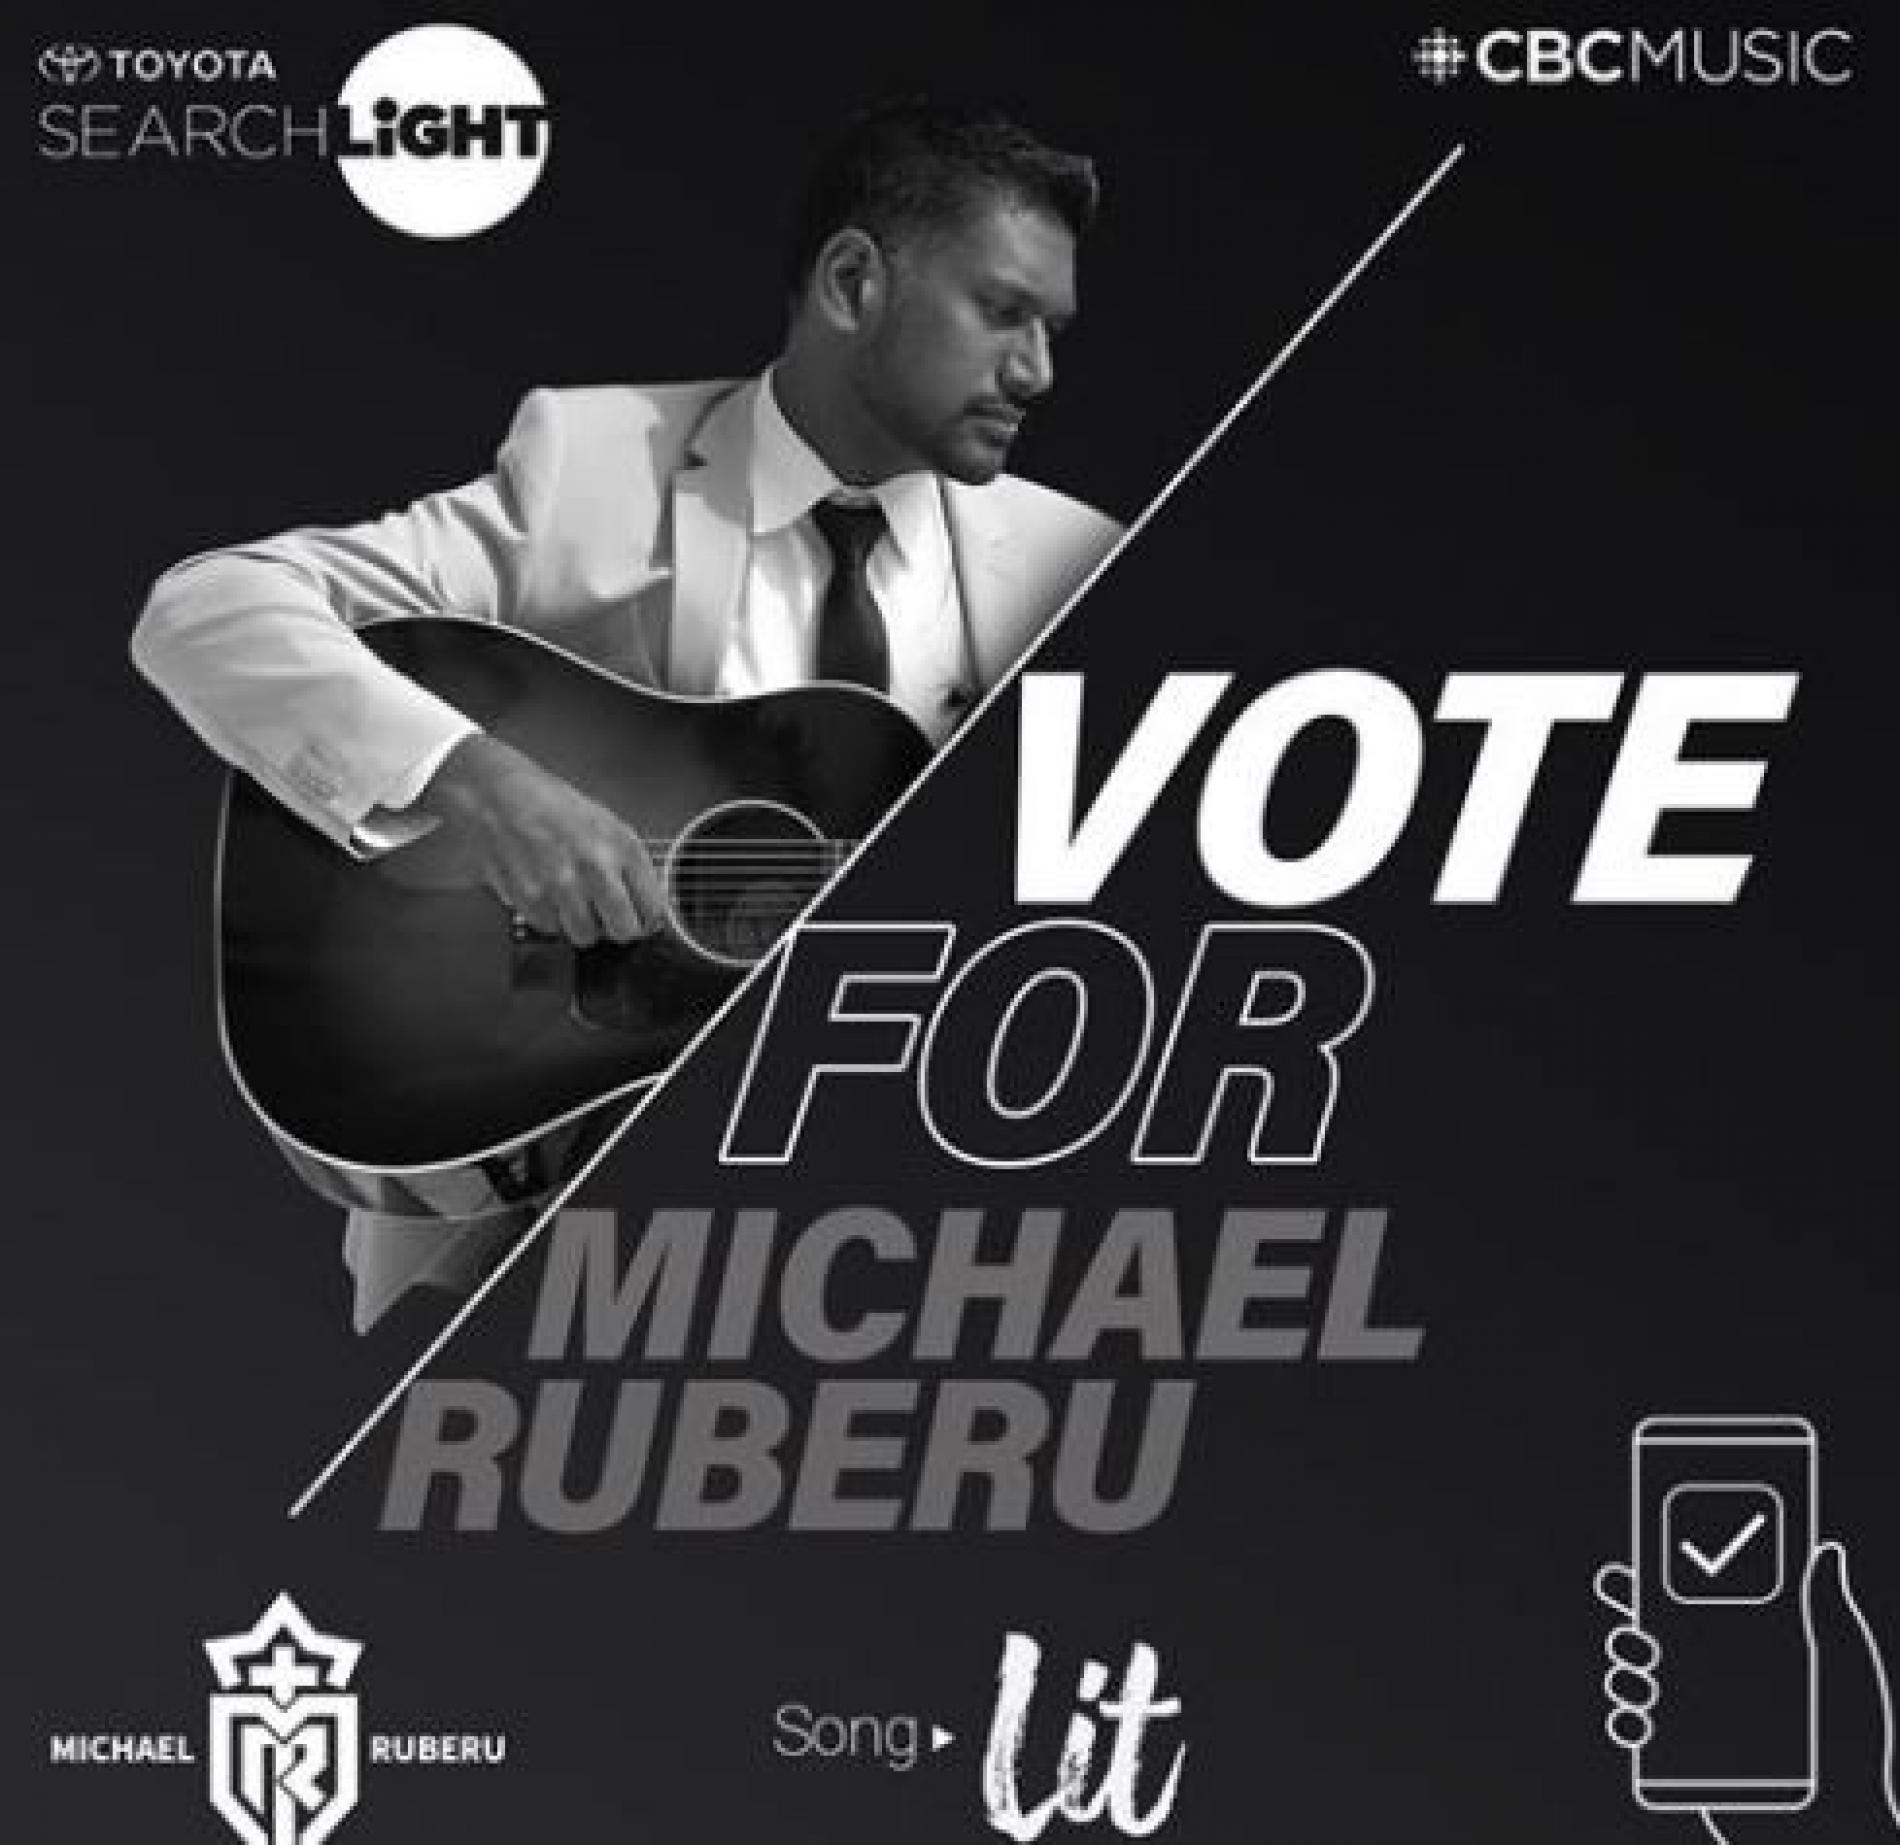 News : Michael Ruberu Wants Your Votes!